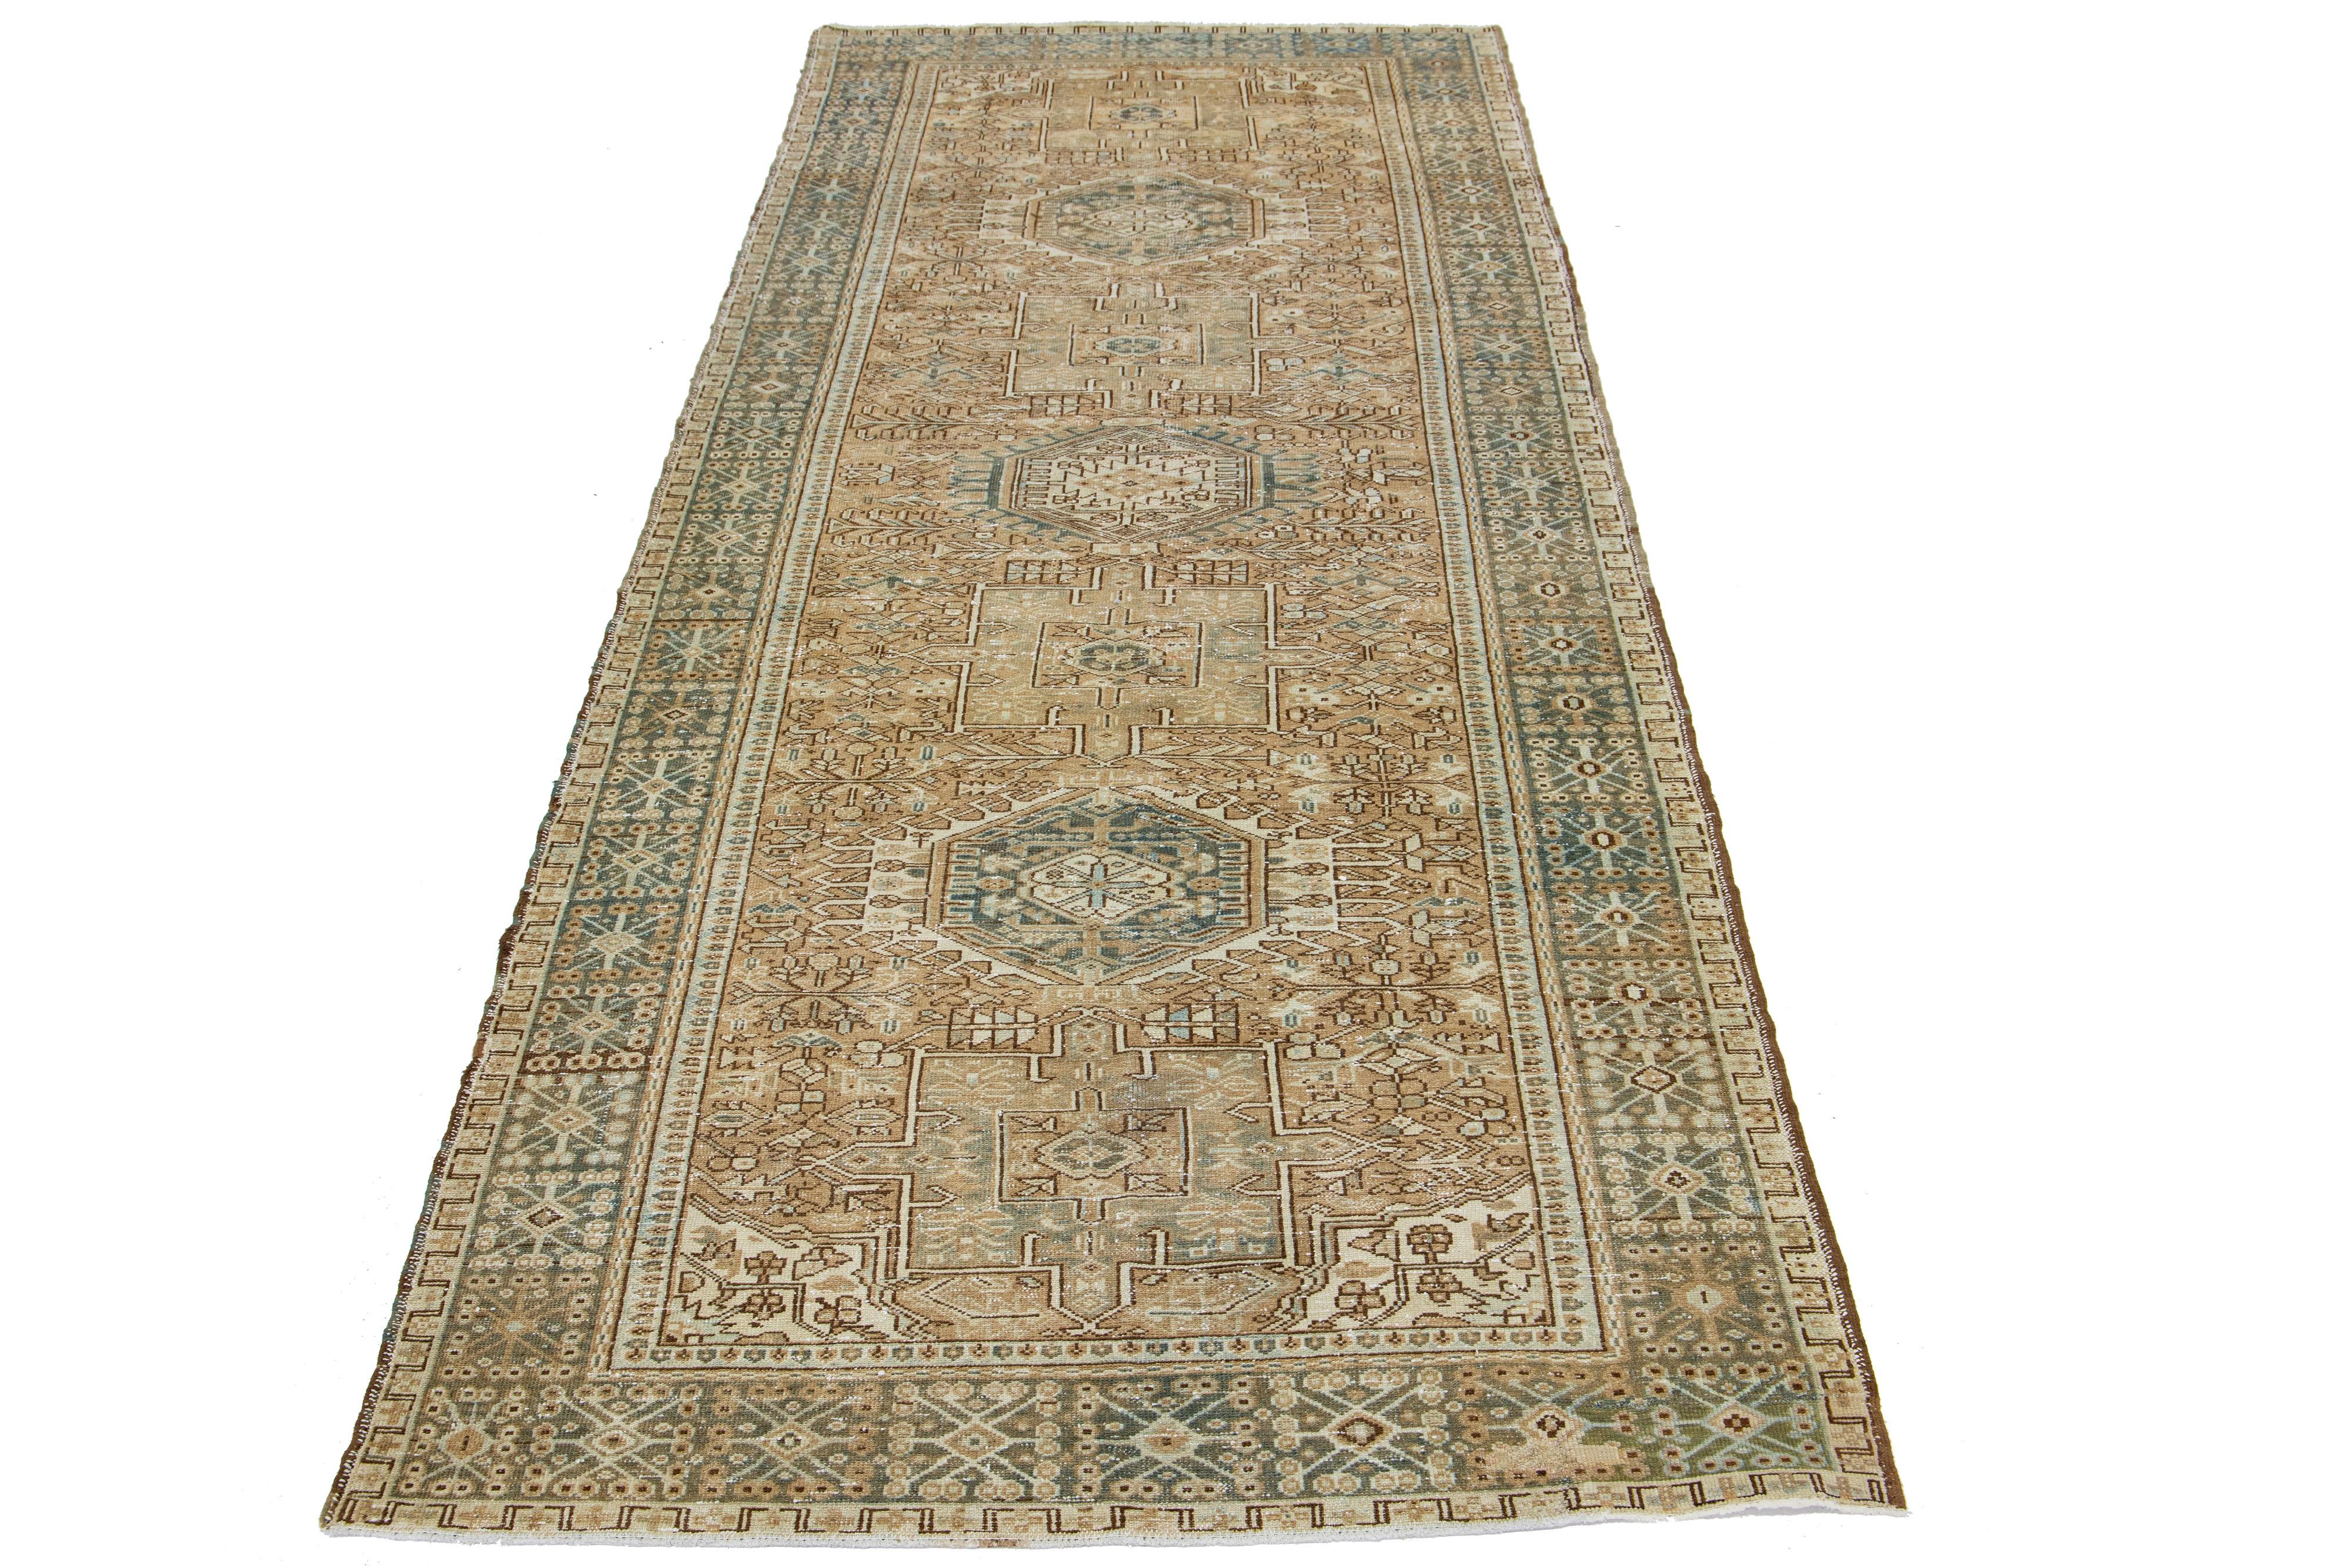 This is a beautiful 20th-century Heriz hand-knotted wool runner with a brown field. The piece boasts stunning blue and beige accents in an exquisite tribal geometric design.

This rug measures 4'9